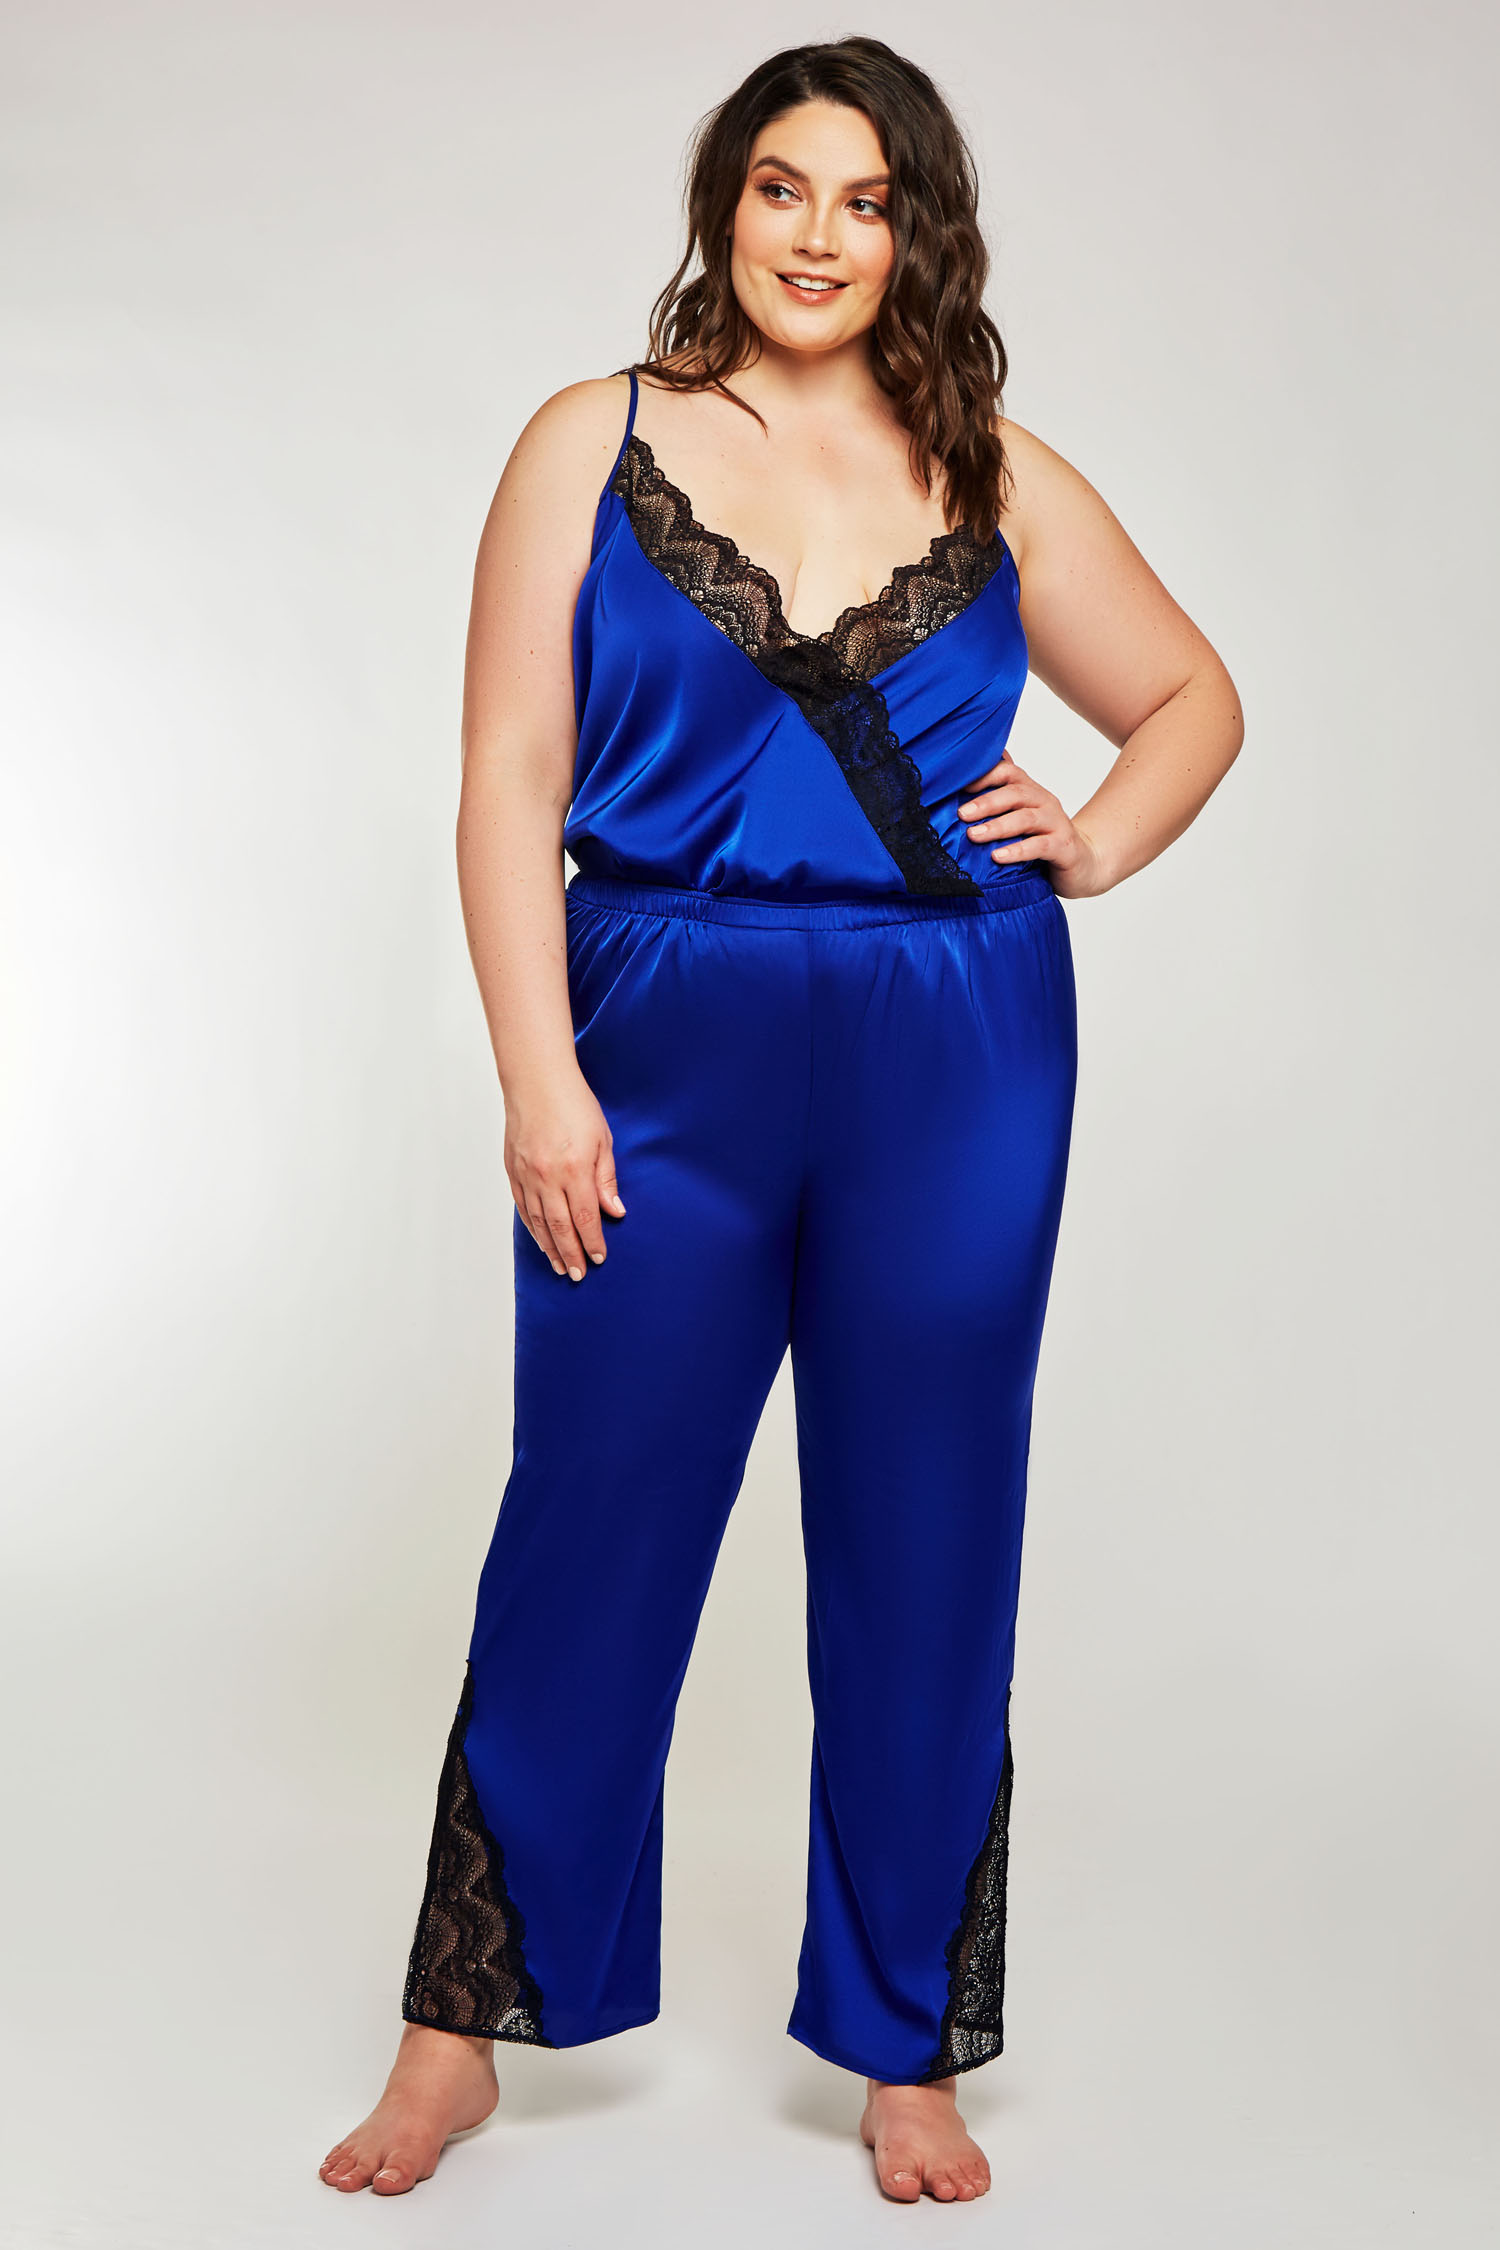 iCollection Tess Jumpsuit - 7988X